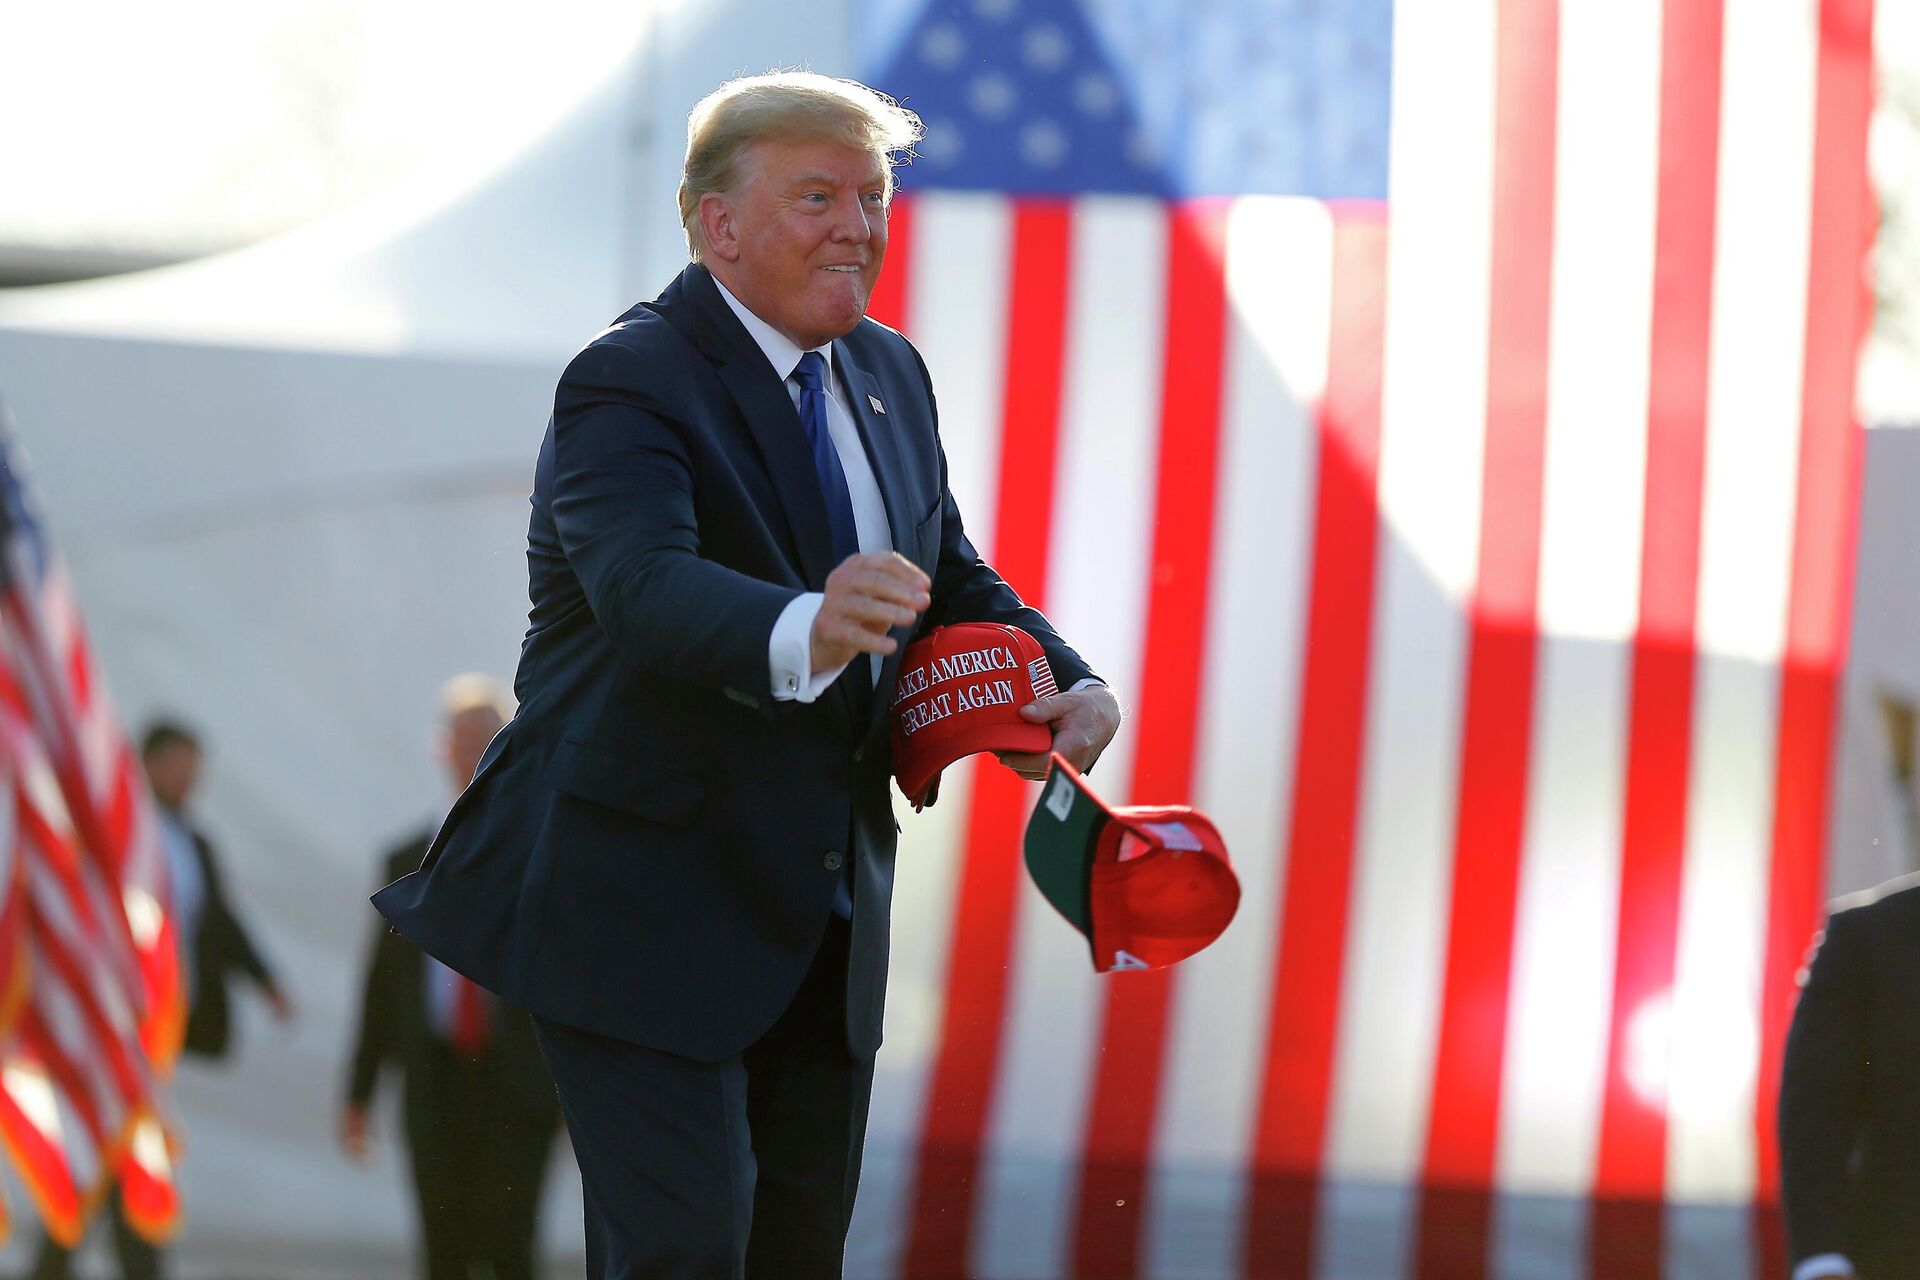 Former President Donald Trump is introduced at a rally at the Delaware County Fairgrounds, Saturday, April 23, 2022, in Delaware, Ohio, to endorse Republican candidates ahead of the Ohio primary on May 3.  - Sputnik International, 1920, 27.04.2022